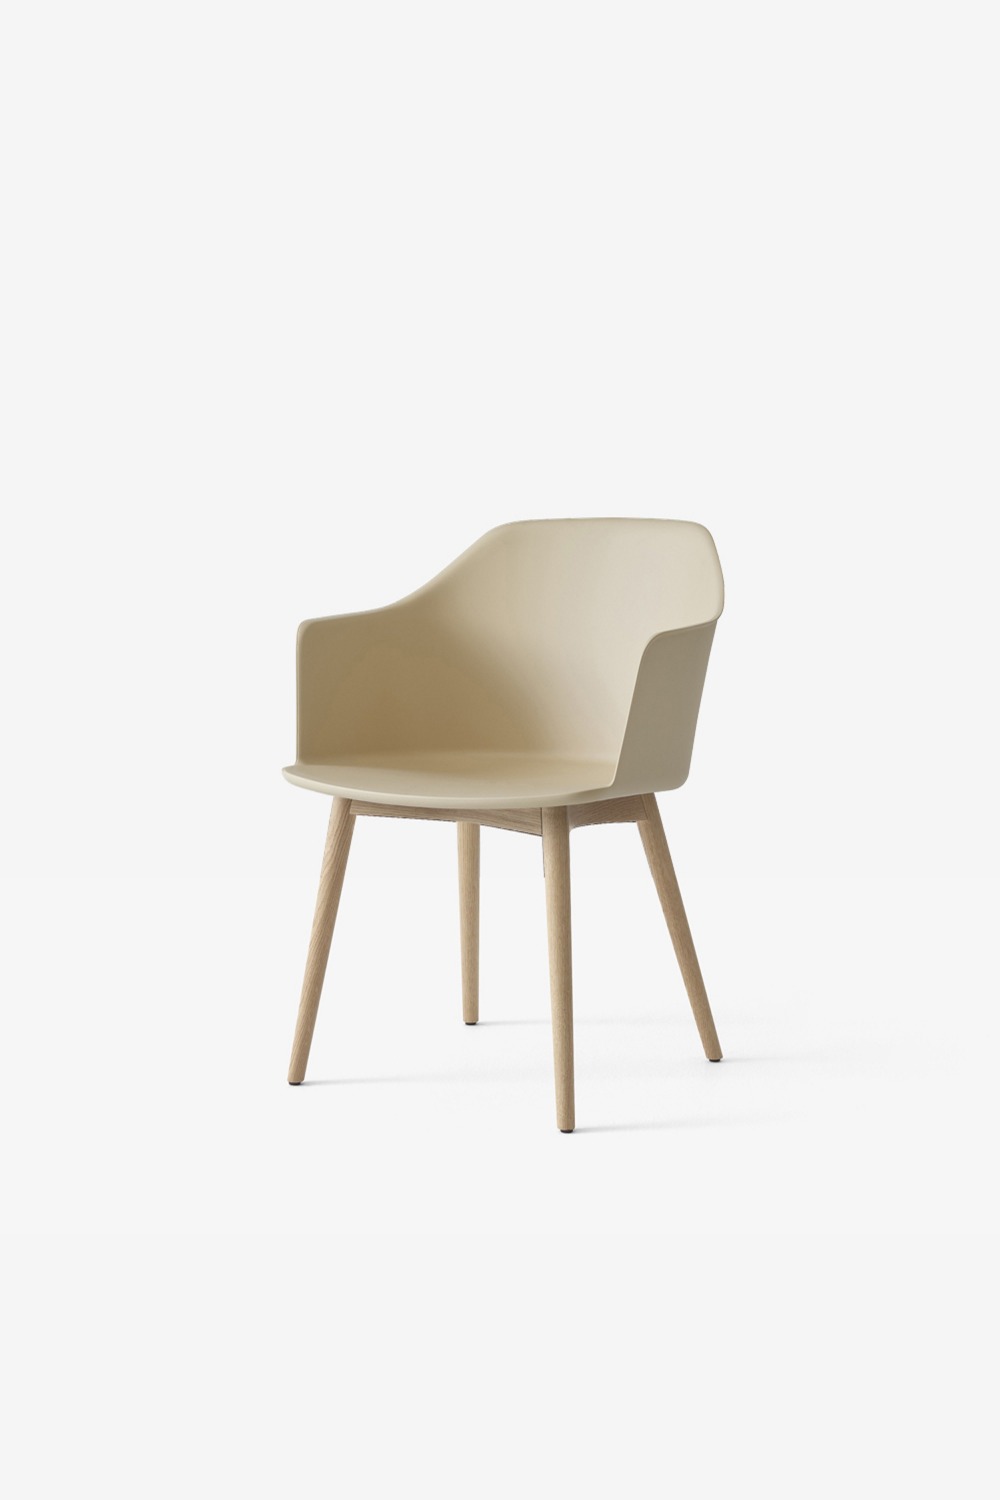 [&amp;Tradition] Rely Chair / HW76 (Beige Sand)